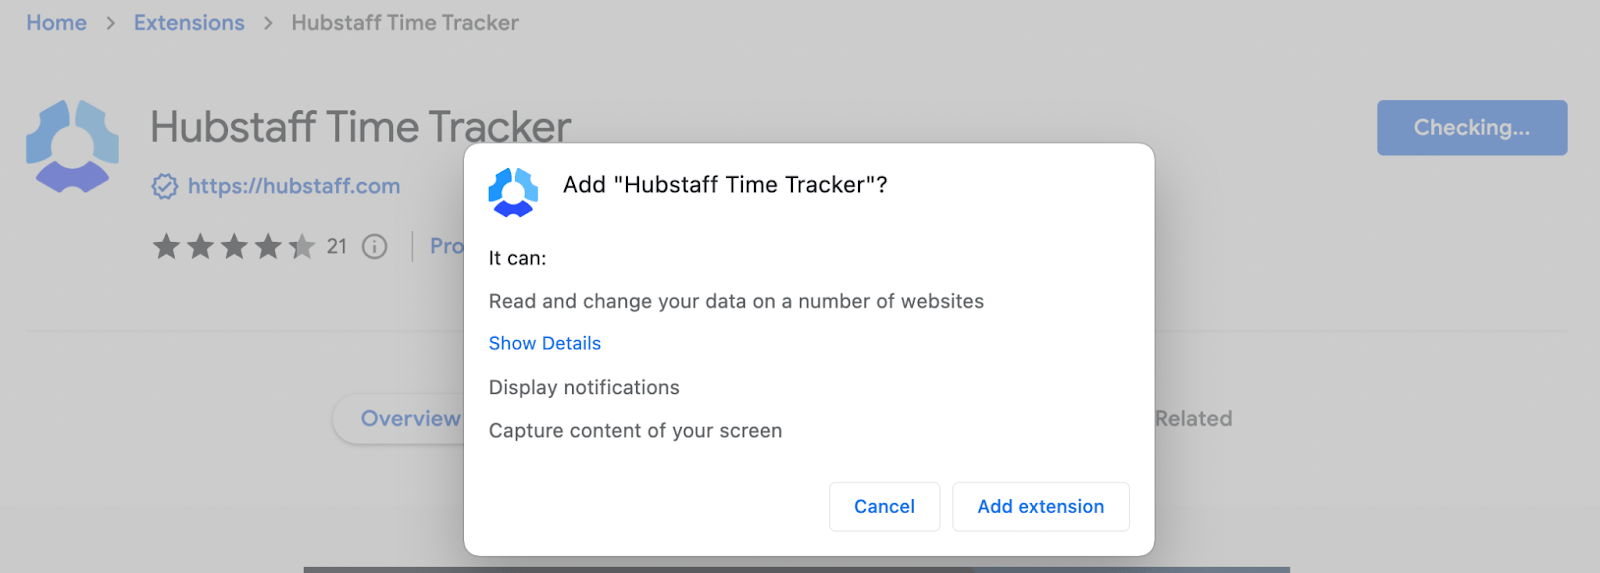 Permission to add the Hubstaff Time Tracker extension to Chrome